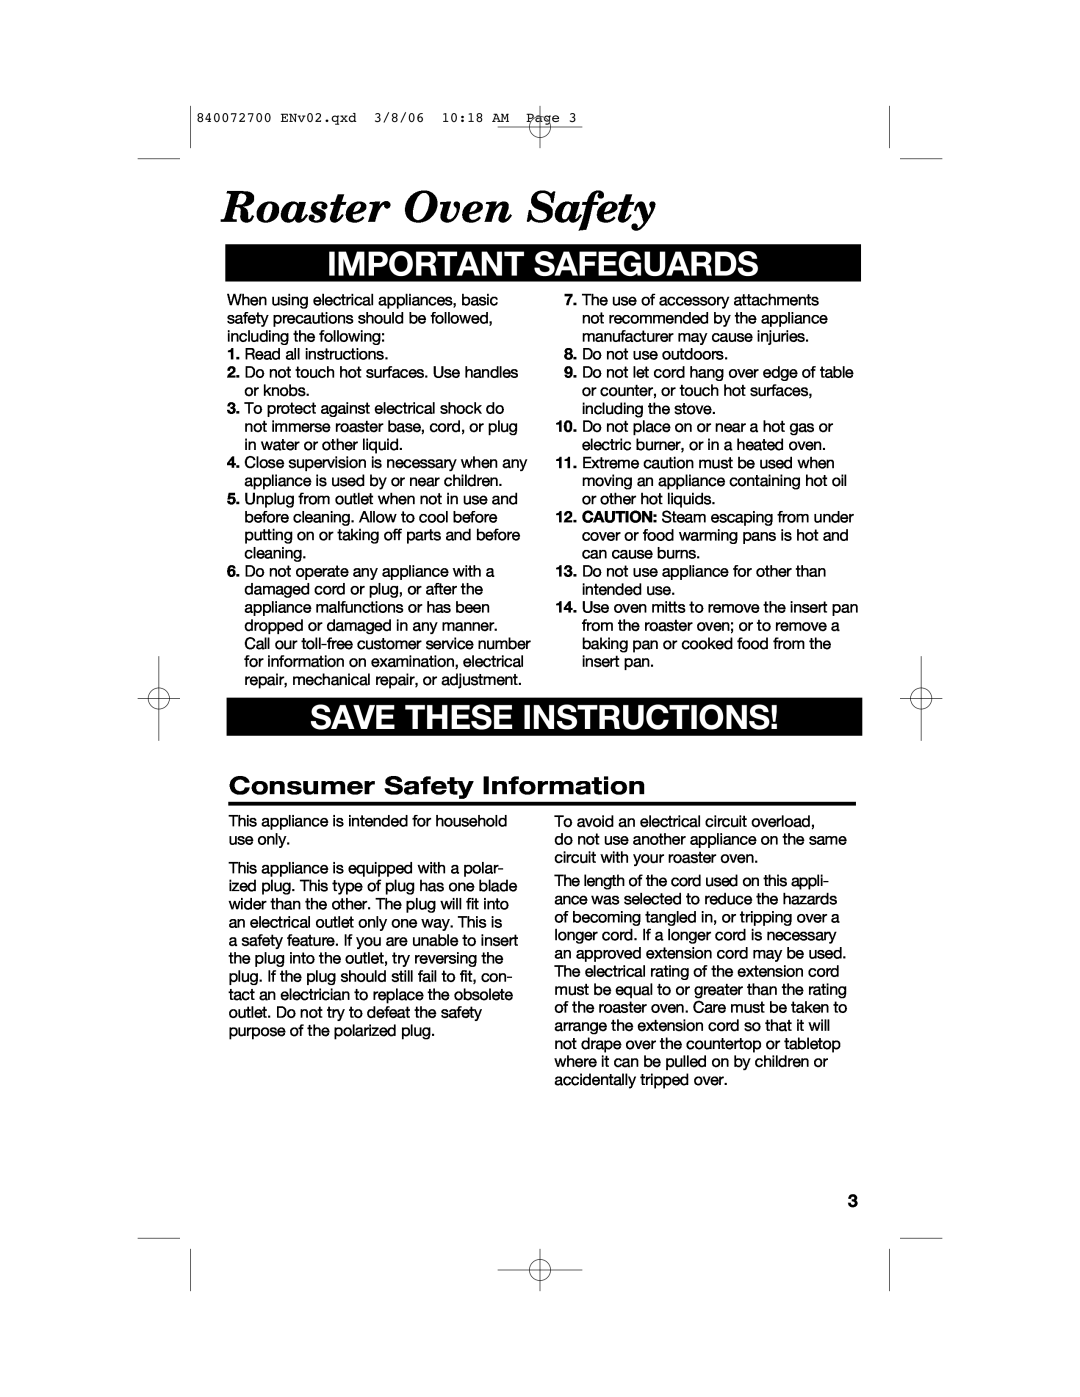 Hamilton Beach 32600s Roaster Oven Safety, Important Safeguards, Save These Instructions, Consumer Safety Information 